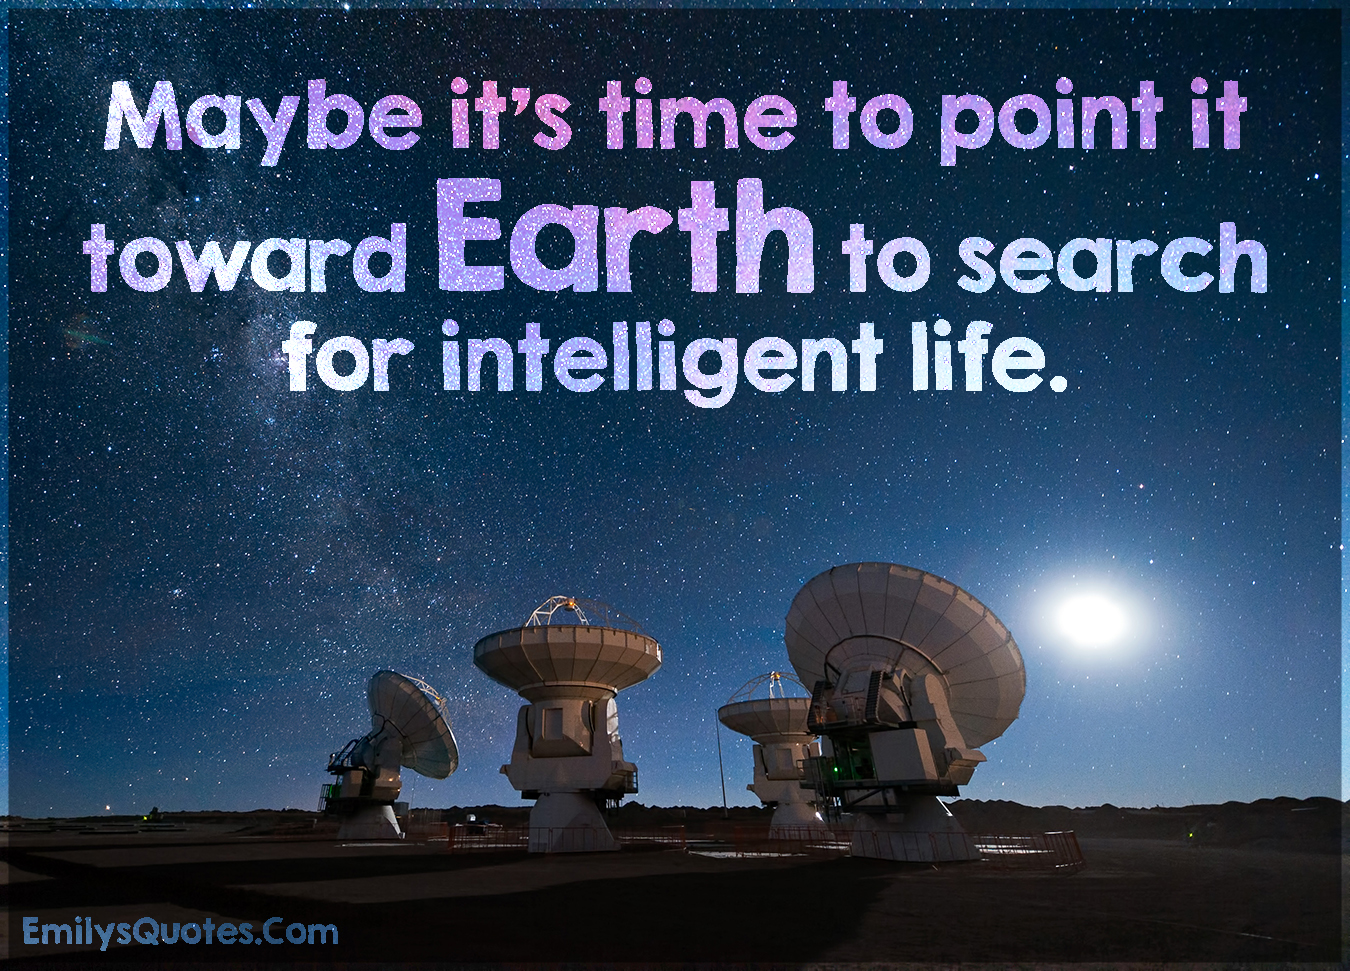 Maybe it’s time to point it toward Earth to search for intelligent life